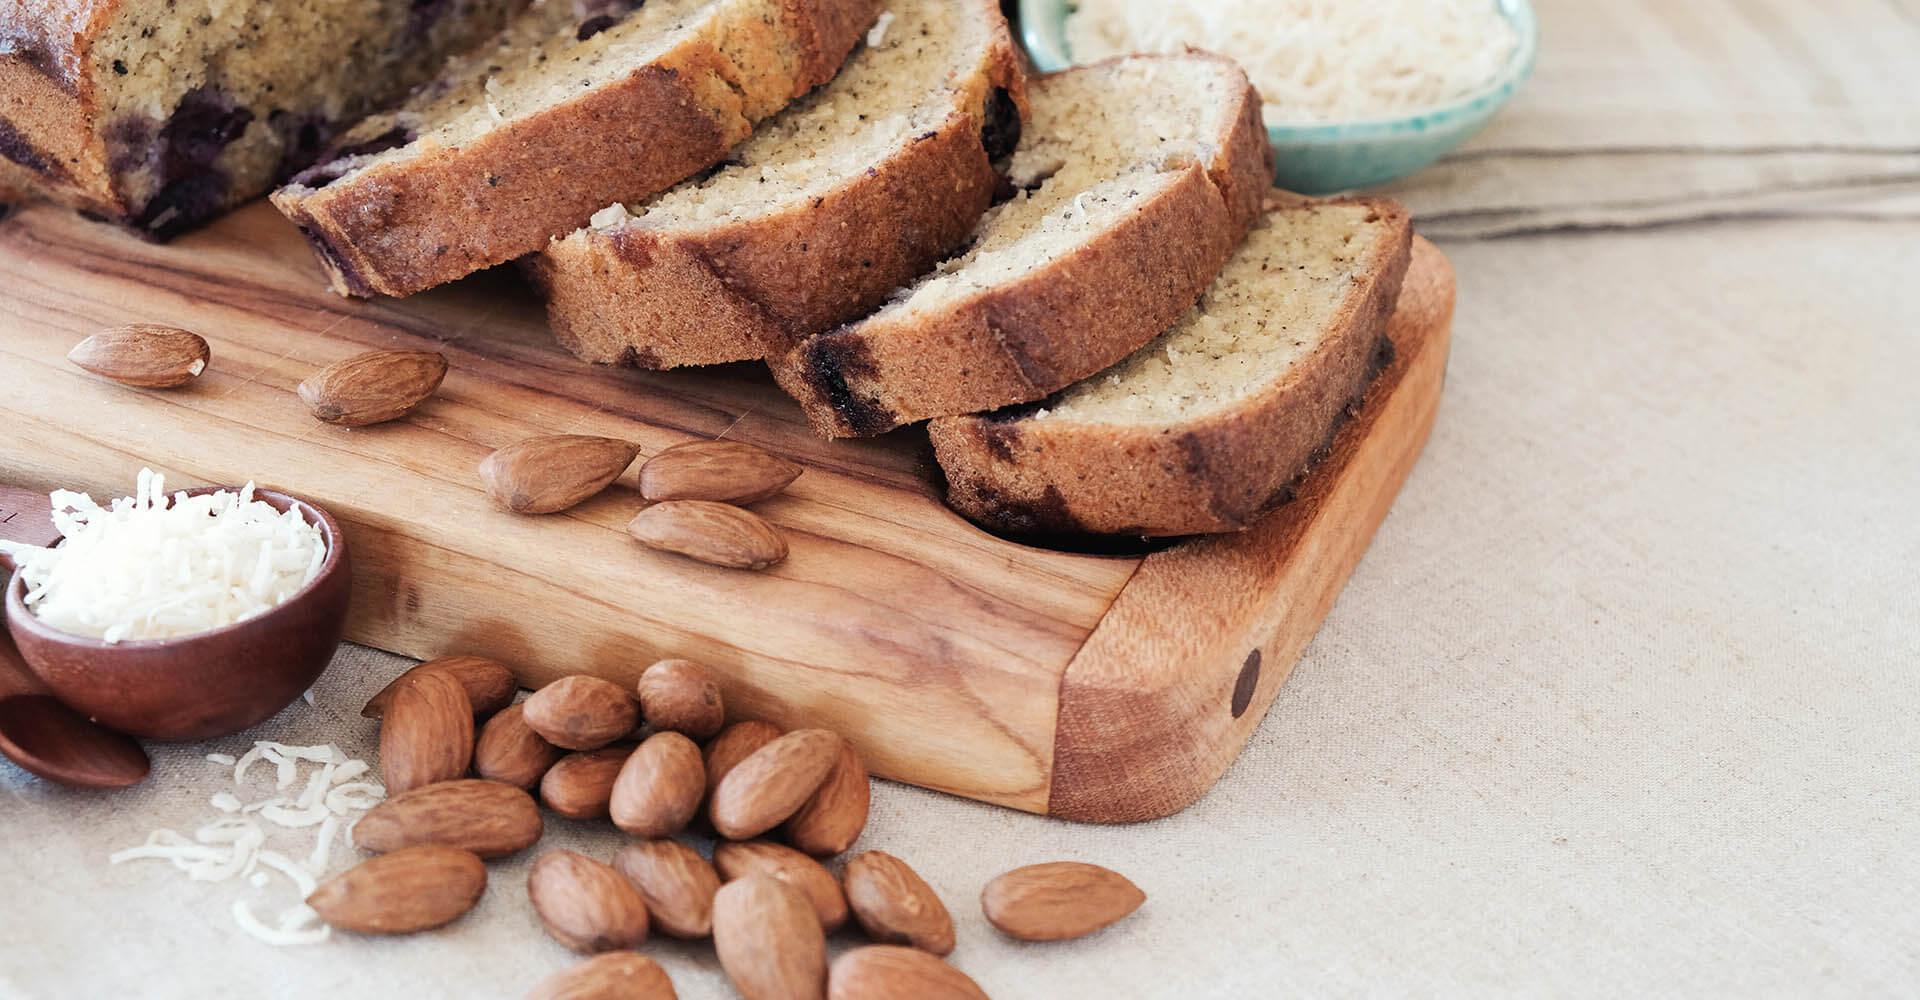 Keto foods like nuts or low-carb bread